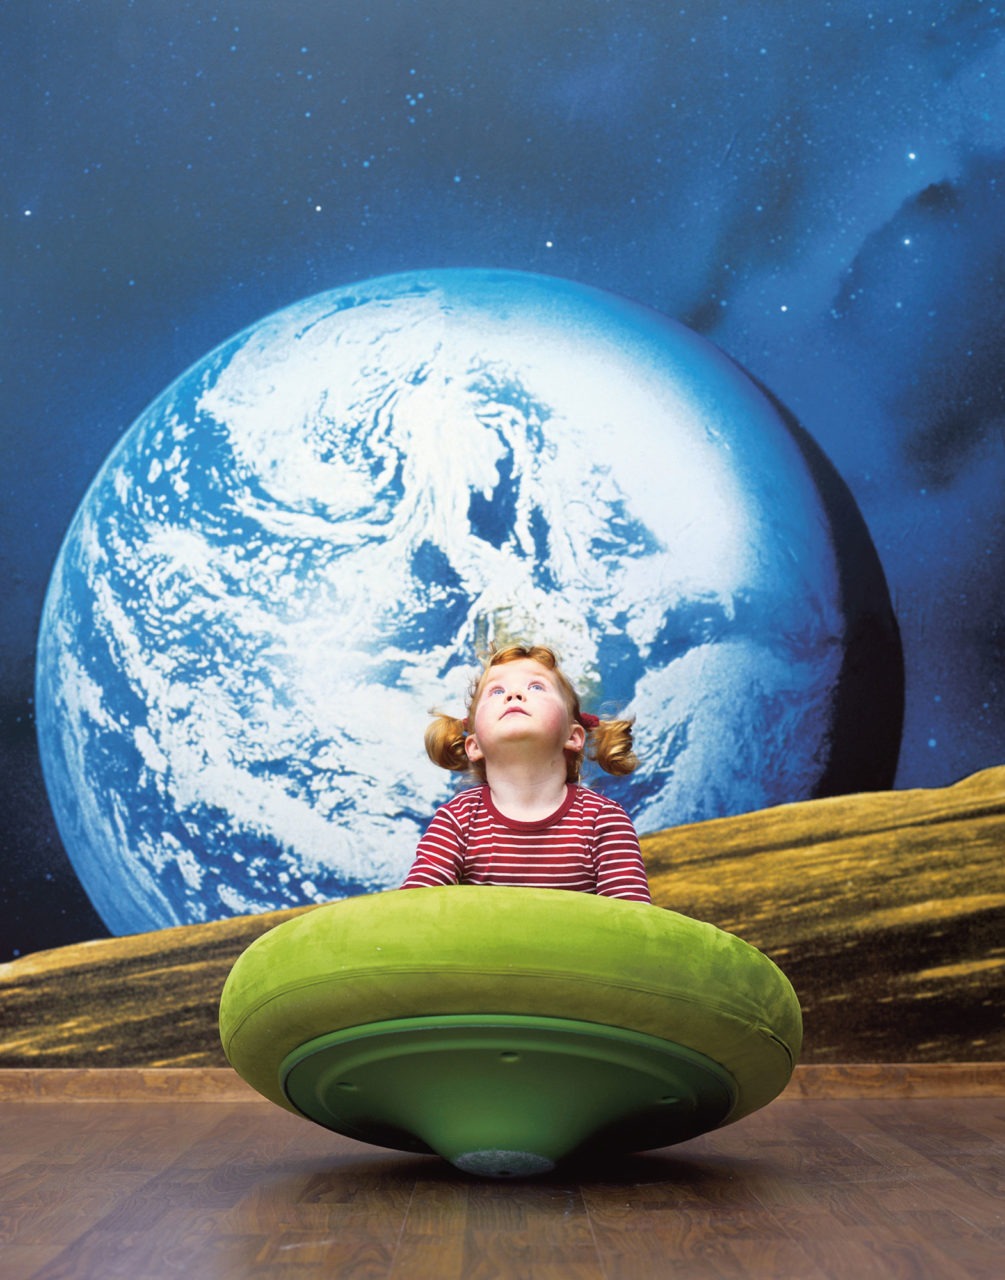 Small girl playing on green planet-shaped piece of furniture against background photo of Earth seen from space.